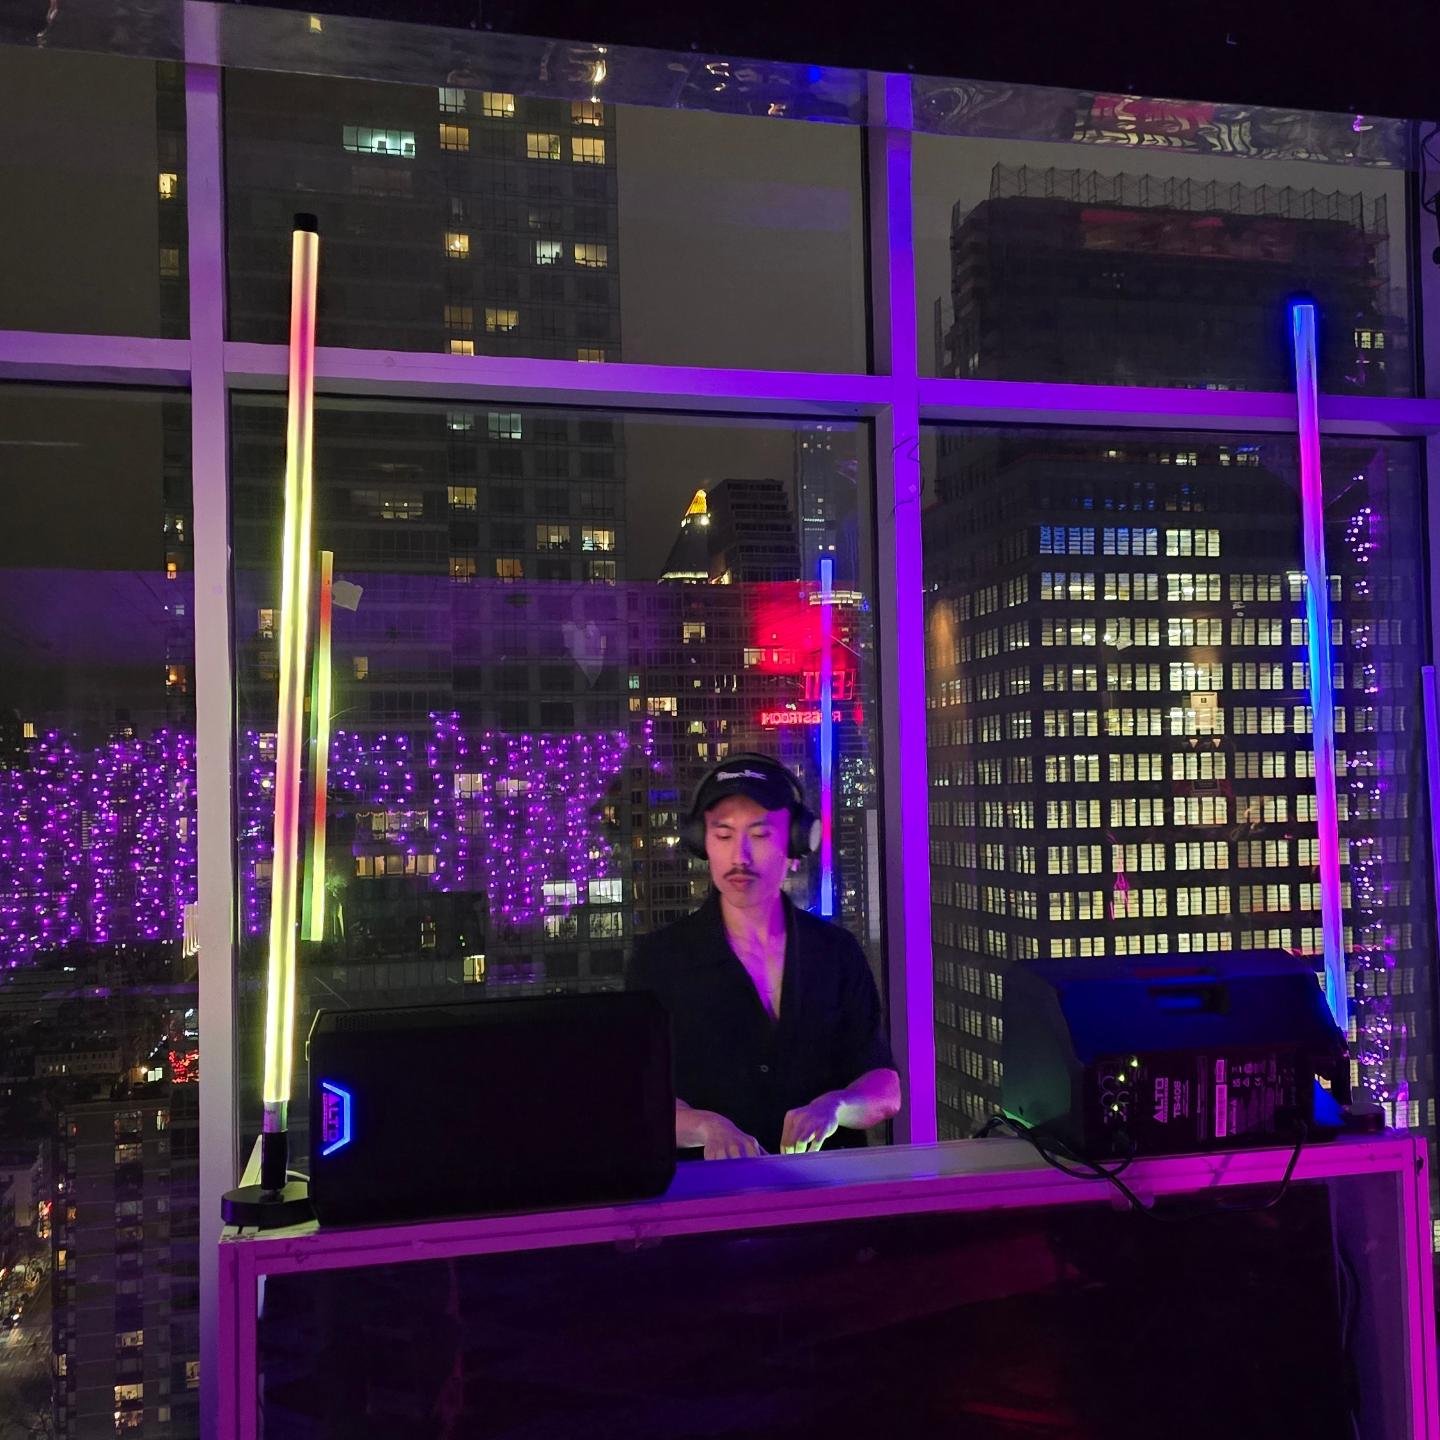 Yesssssssssssss its Yong! Closed us out hard for our last Naarak at Highbar. Thank you everyone for coming out last night! Naarak Fridays will be on pause until we find a new home for our Fridays.

Will miss the staff and the views at highbar, they t